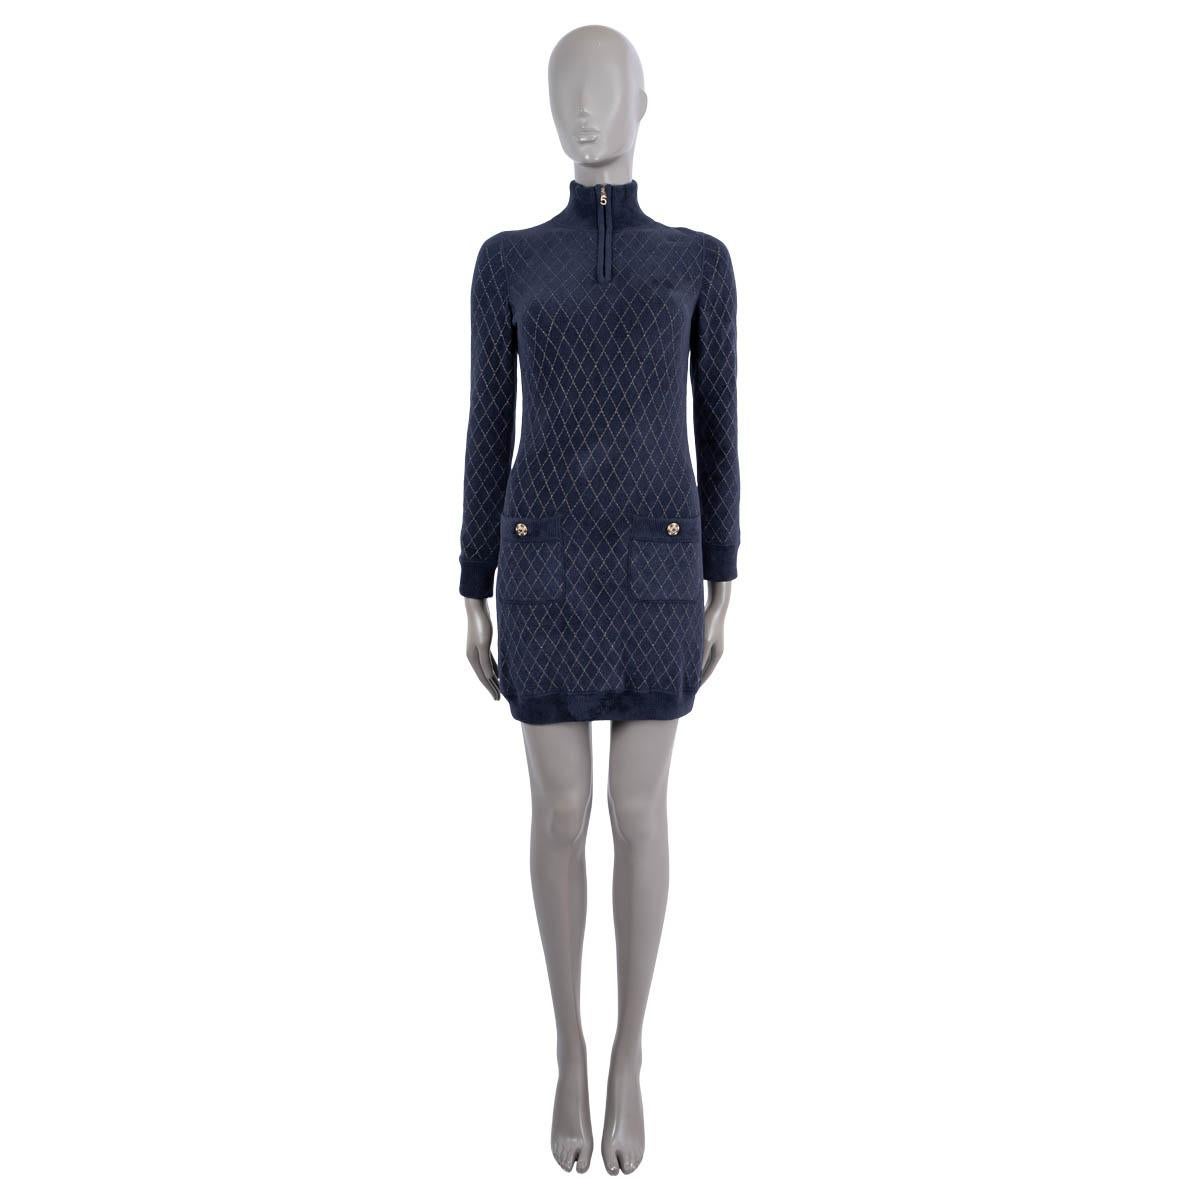 100% authentic Chanel 2019 long sleeve mini dress in navy blue stretchy, soft & fluffy terry cloth viscose (66%), polyamide (33%) and polyester (1%) with quilted golden lurex pattern. The design features a ribbed stand-up collar, cuffs, hem and two